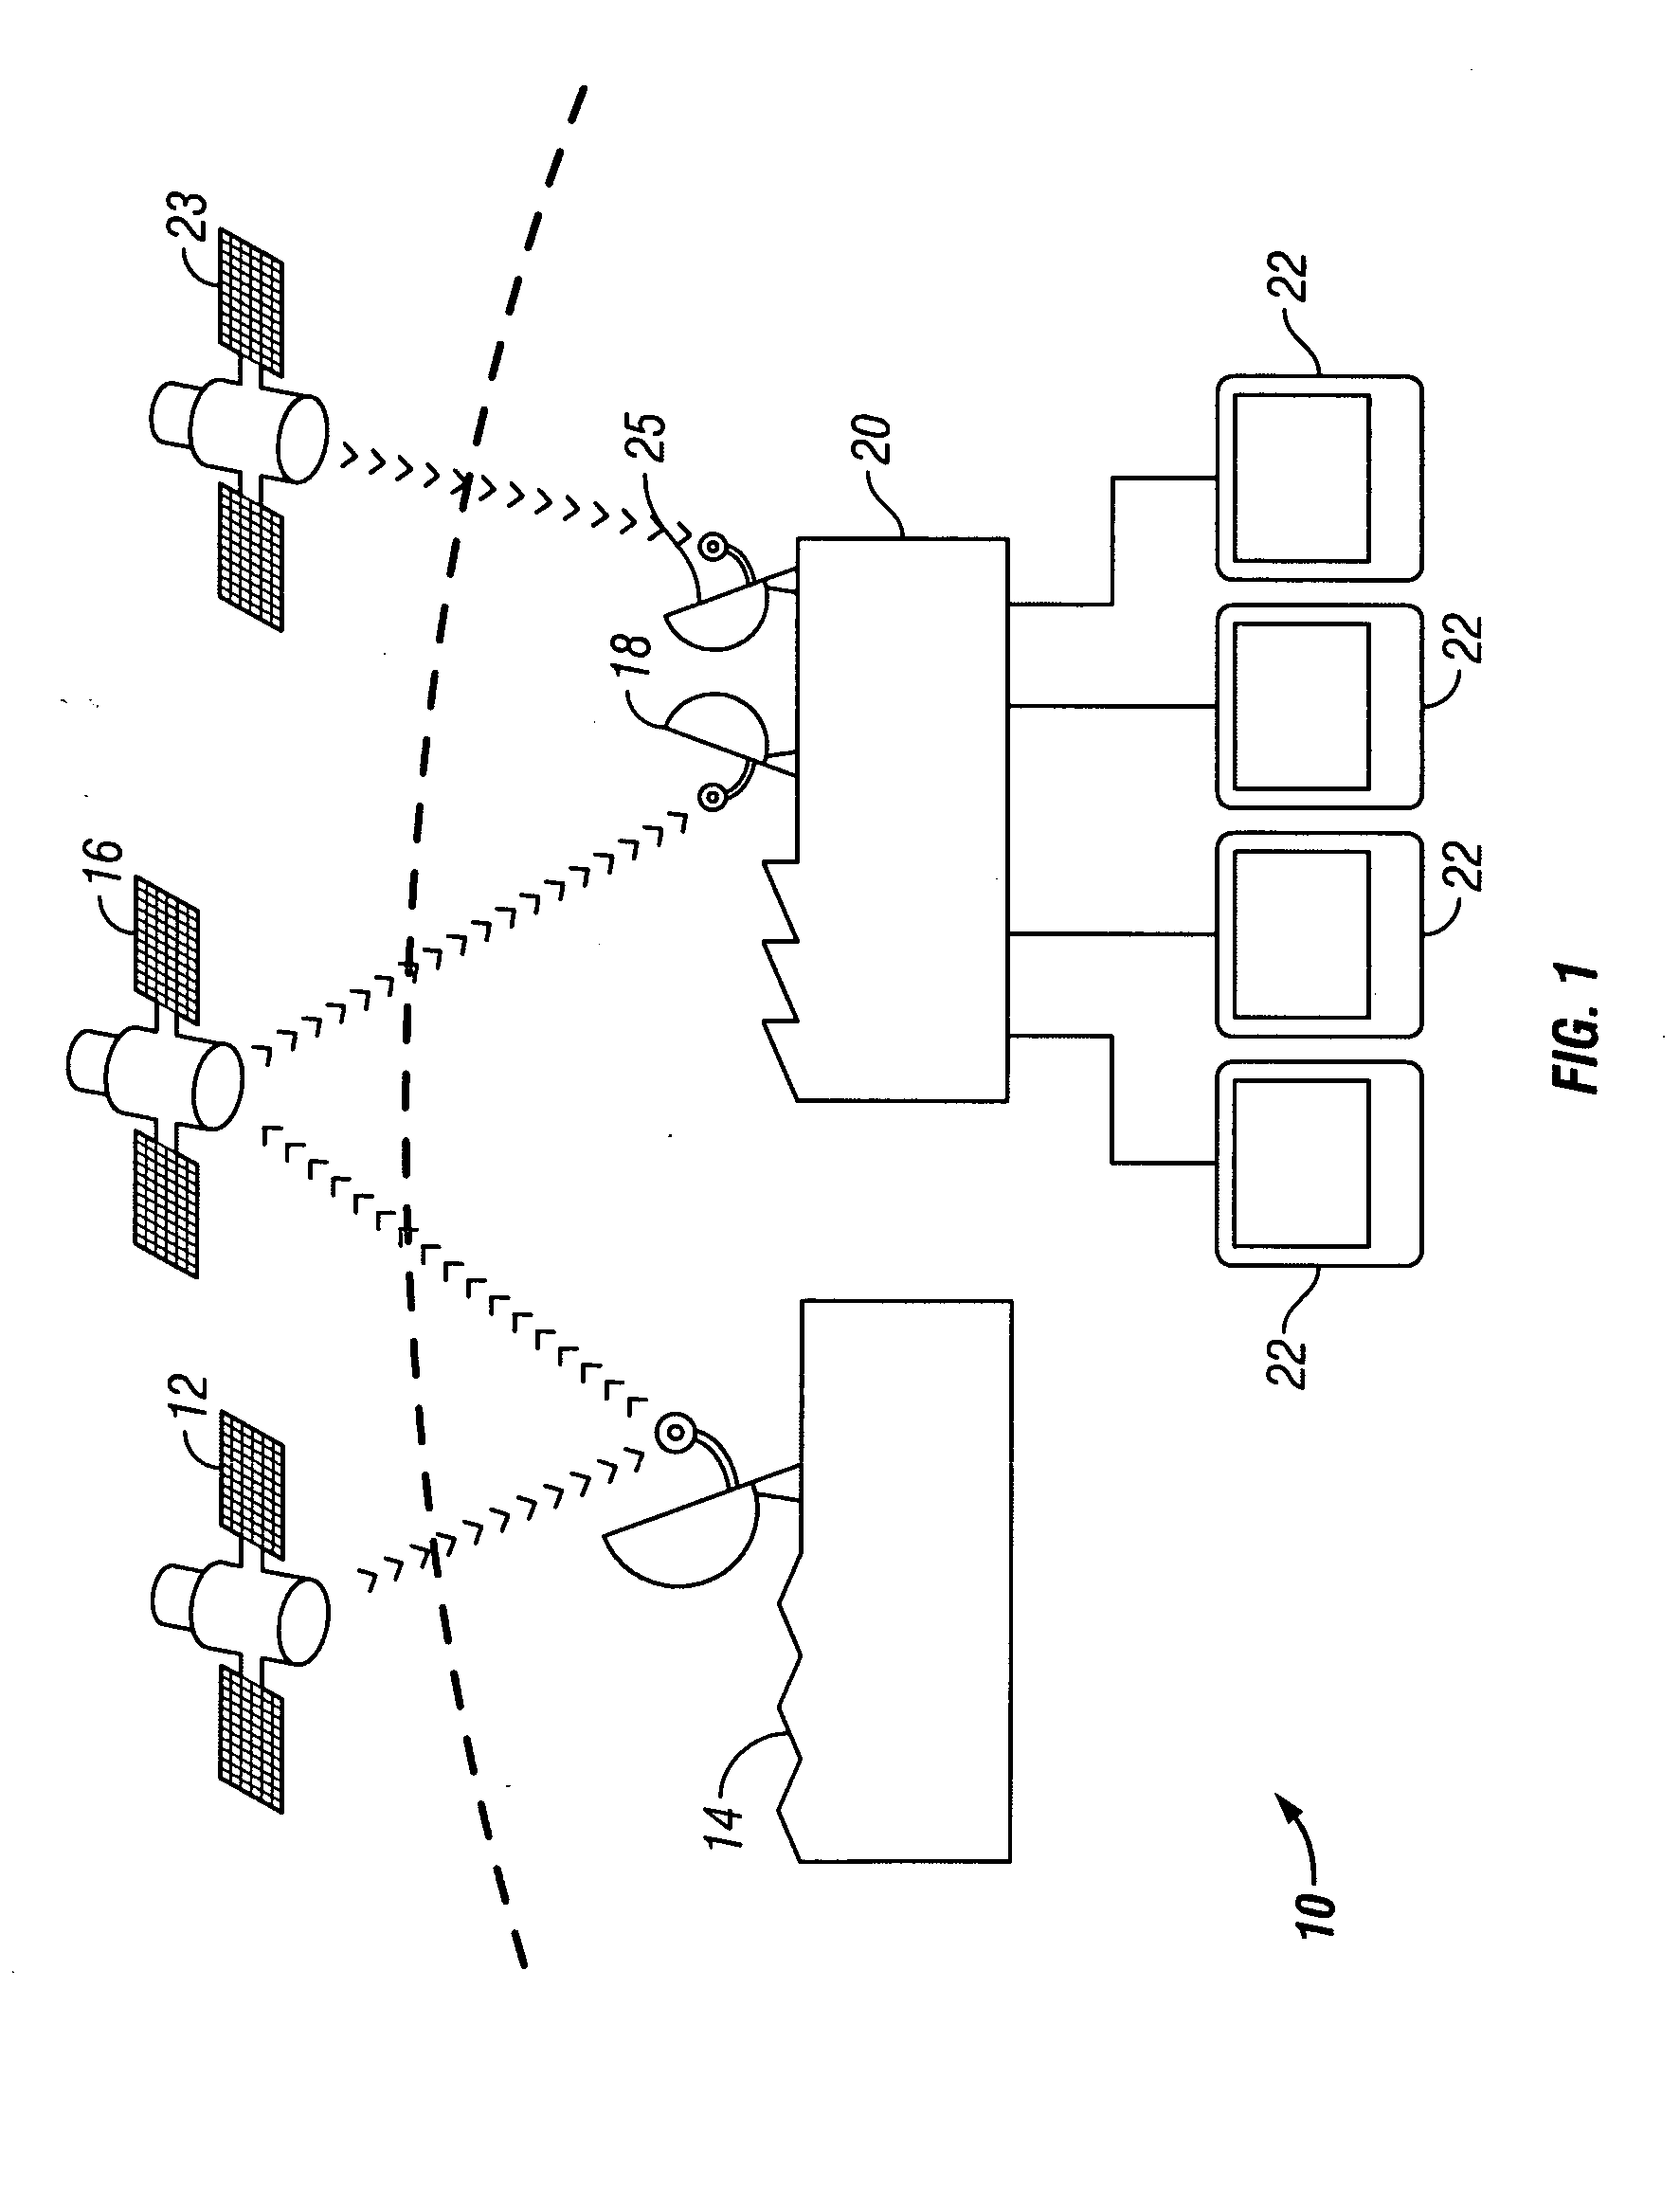 System and methods for network TV broadcasts for out-of-home viewing with targeted advertising